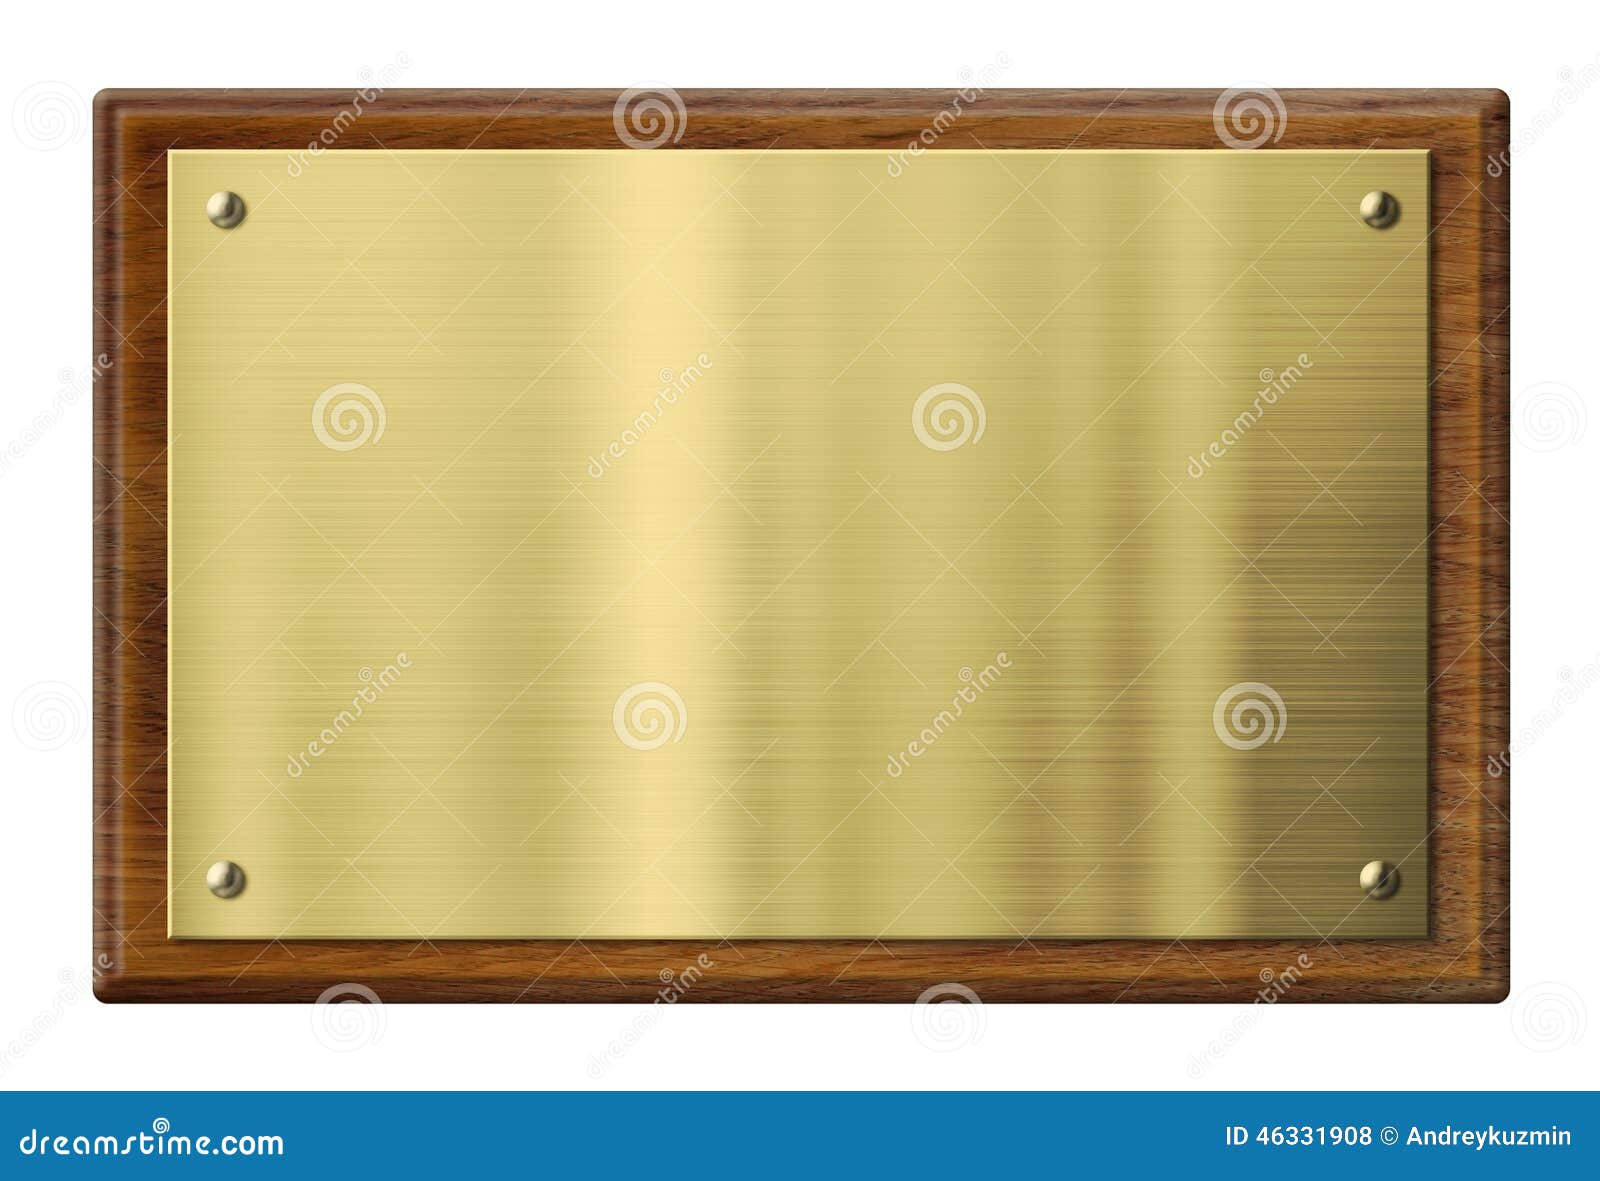 wood plaque with brass or gold metal plate.